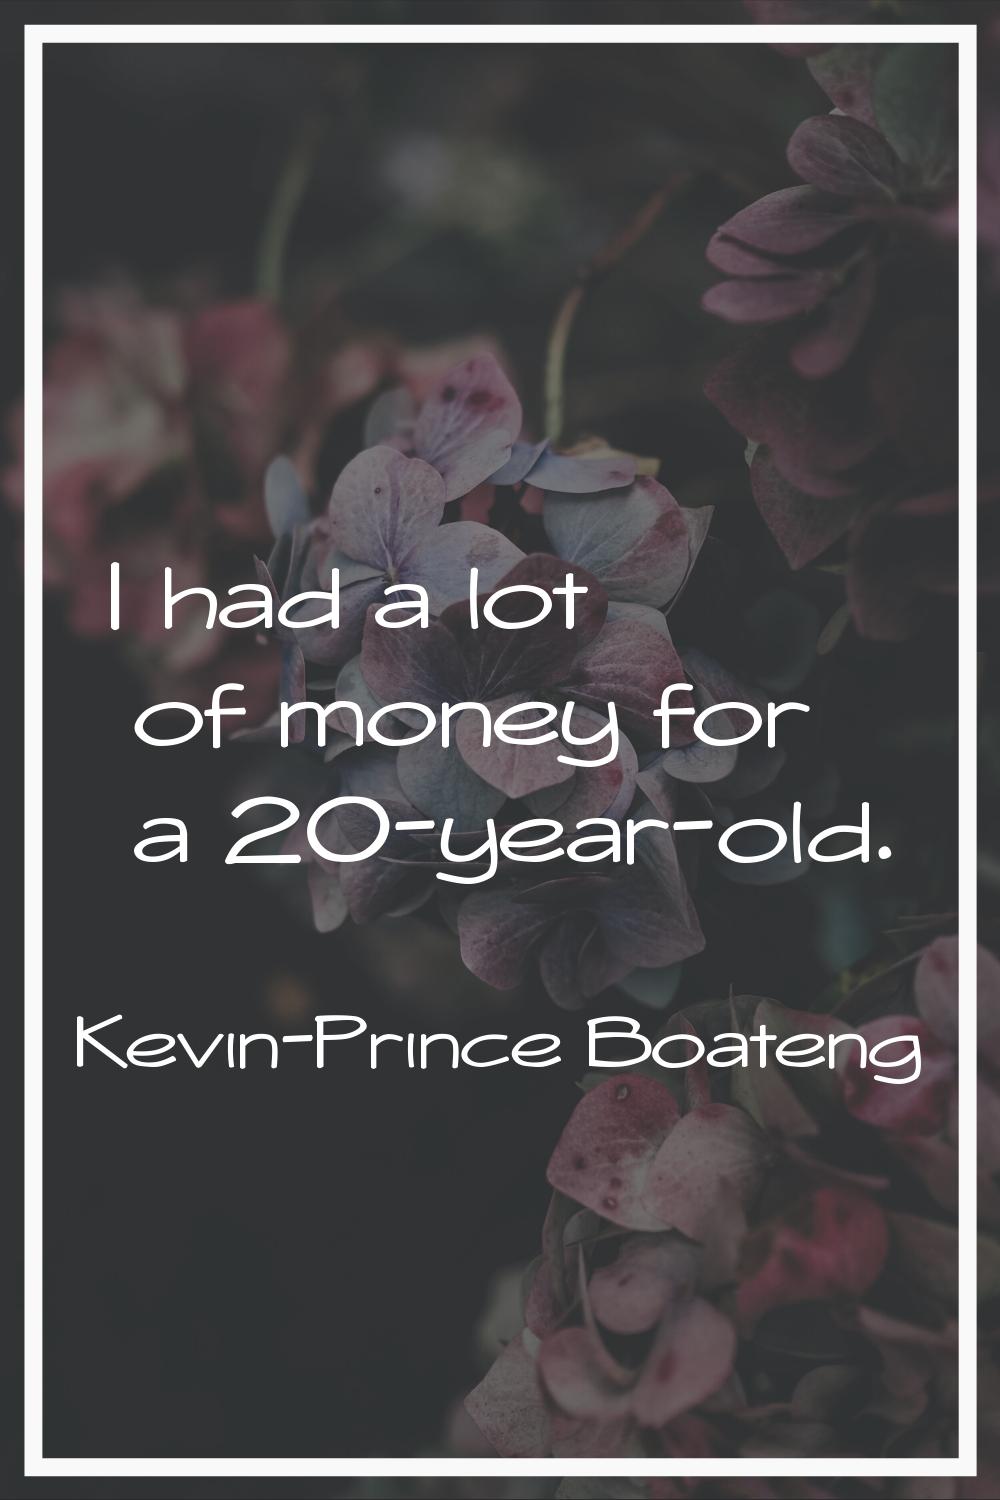 I had a lot of money for a 20-year-old.